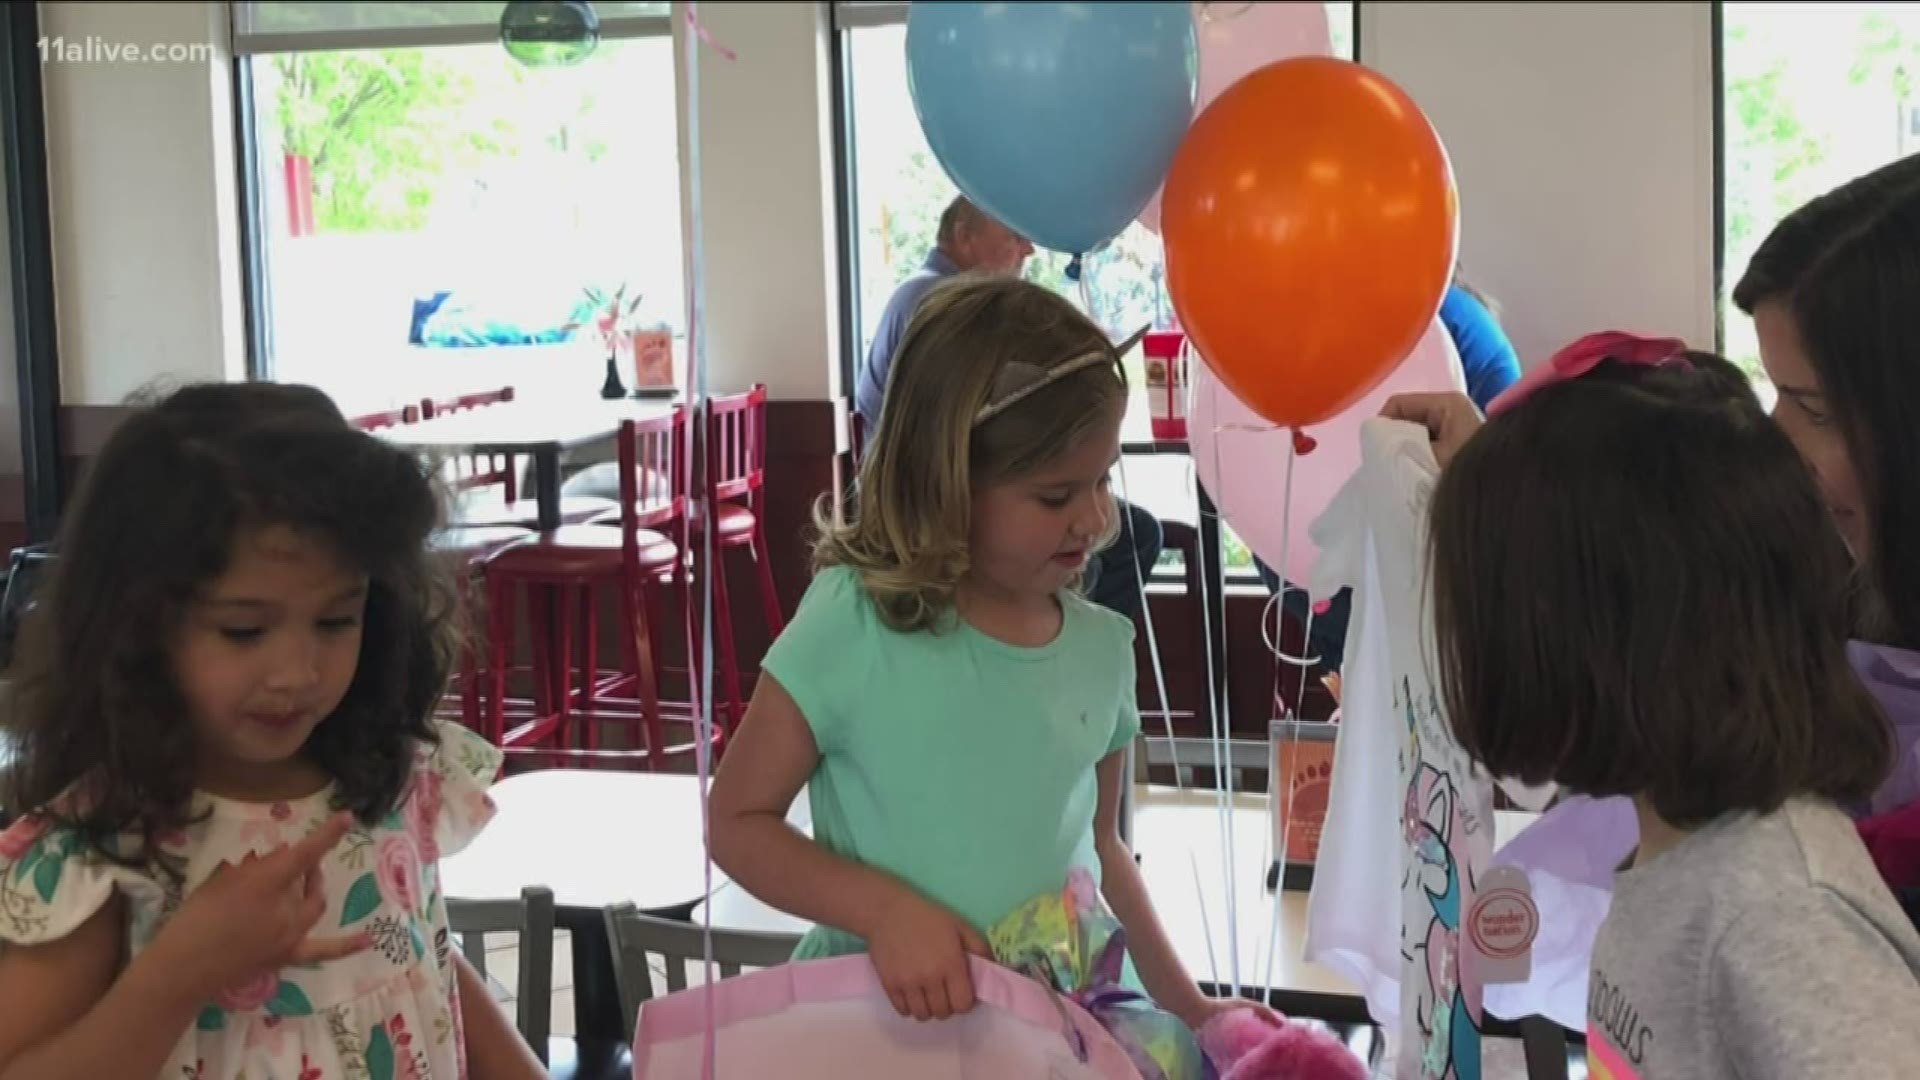 Chick-fil-A helped make Raelyn Scholes' 'Fun Friday' bright with a special party for her friends.